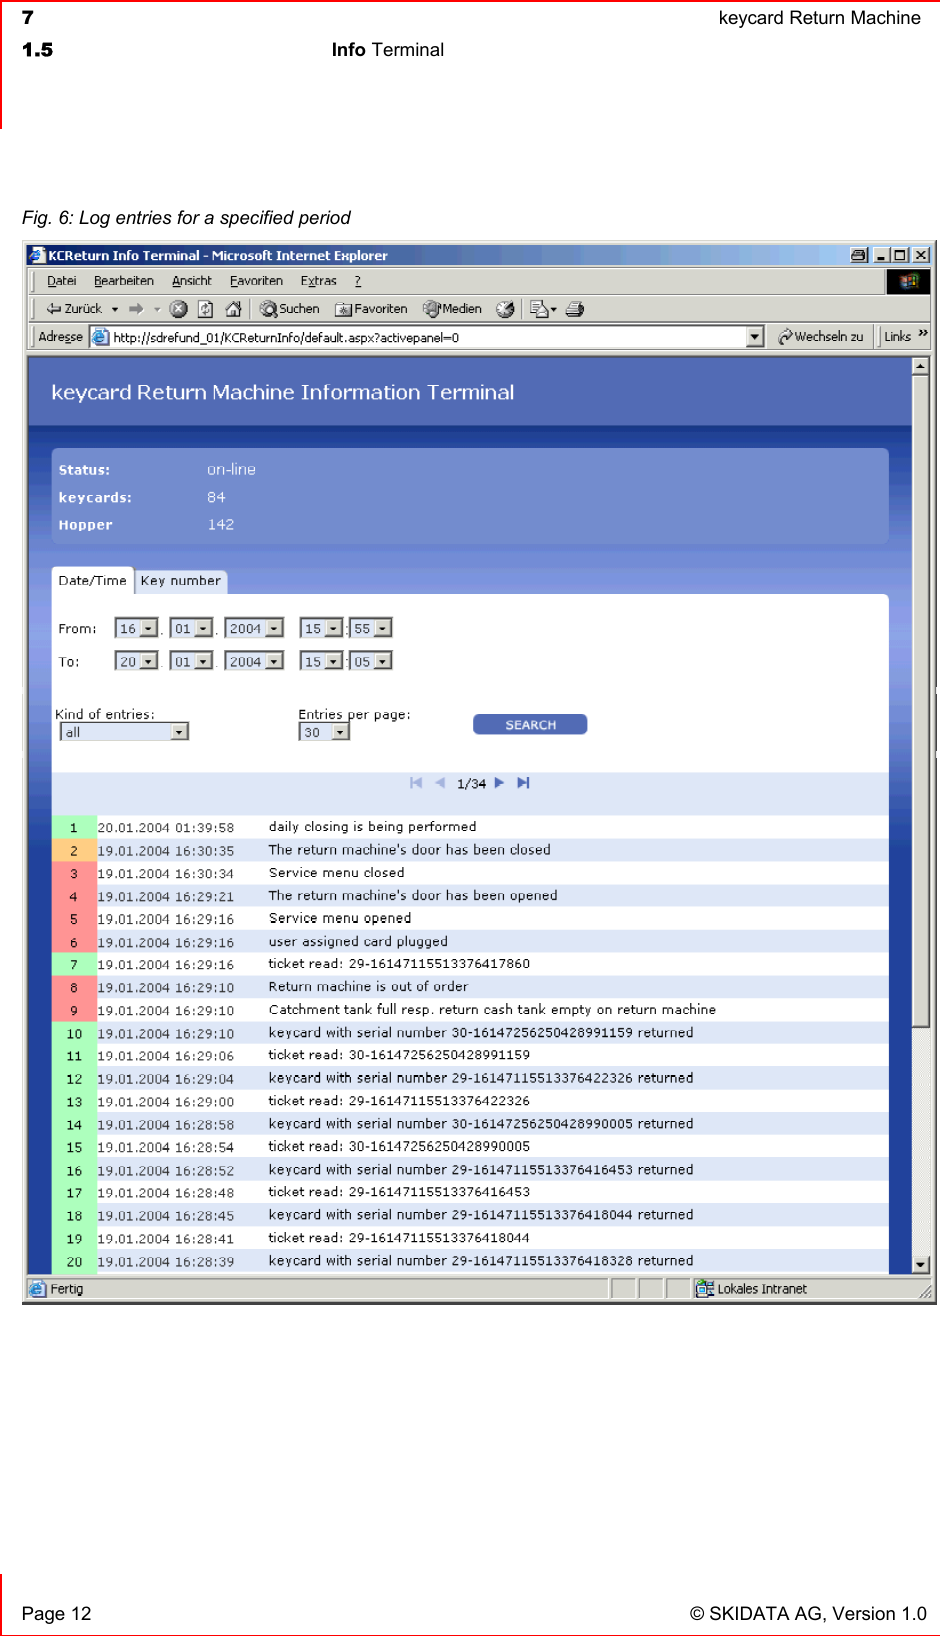  7  keycard Return Machine1.5 Info Terminal   Page 12  © SKIDATA AG, Version 1.0 Fig. 6: Log entries for a specified period 